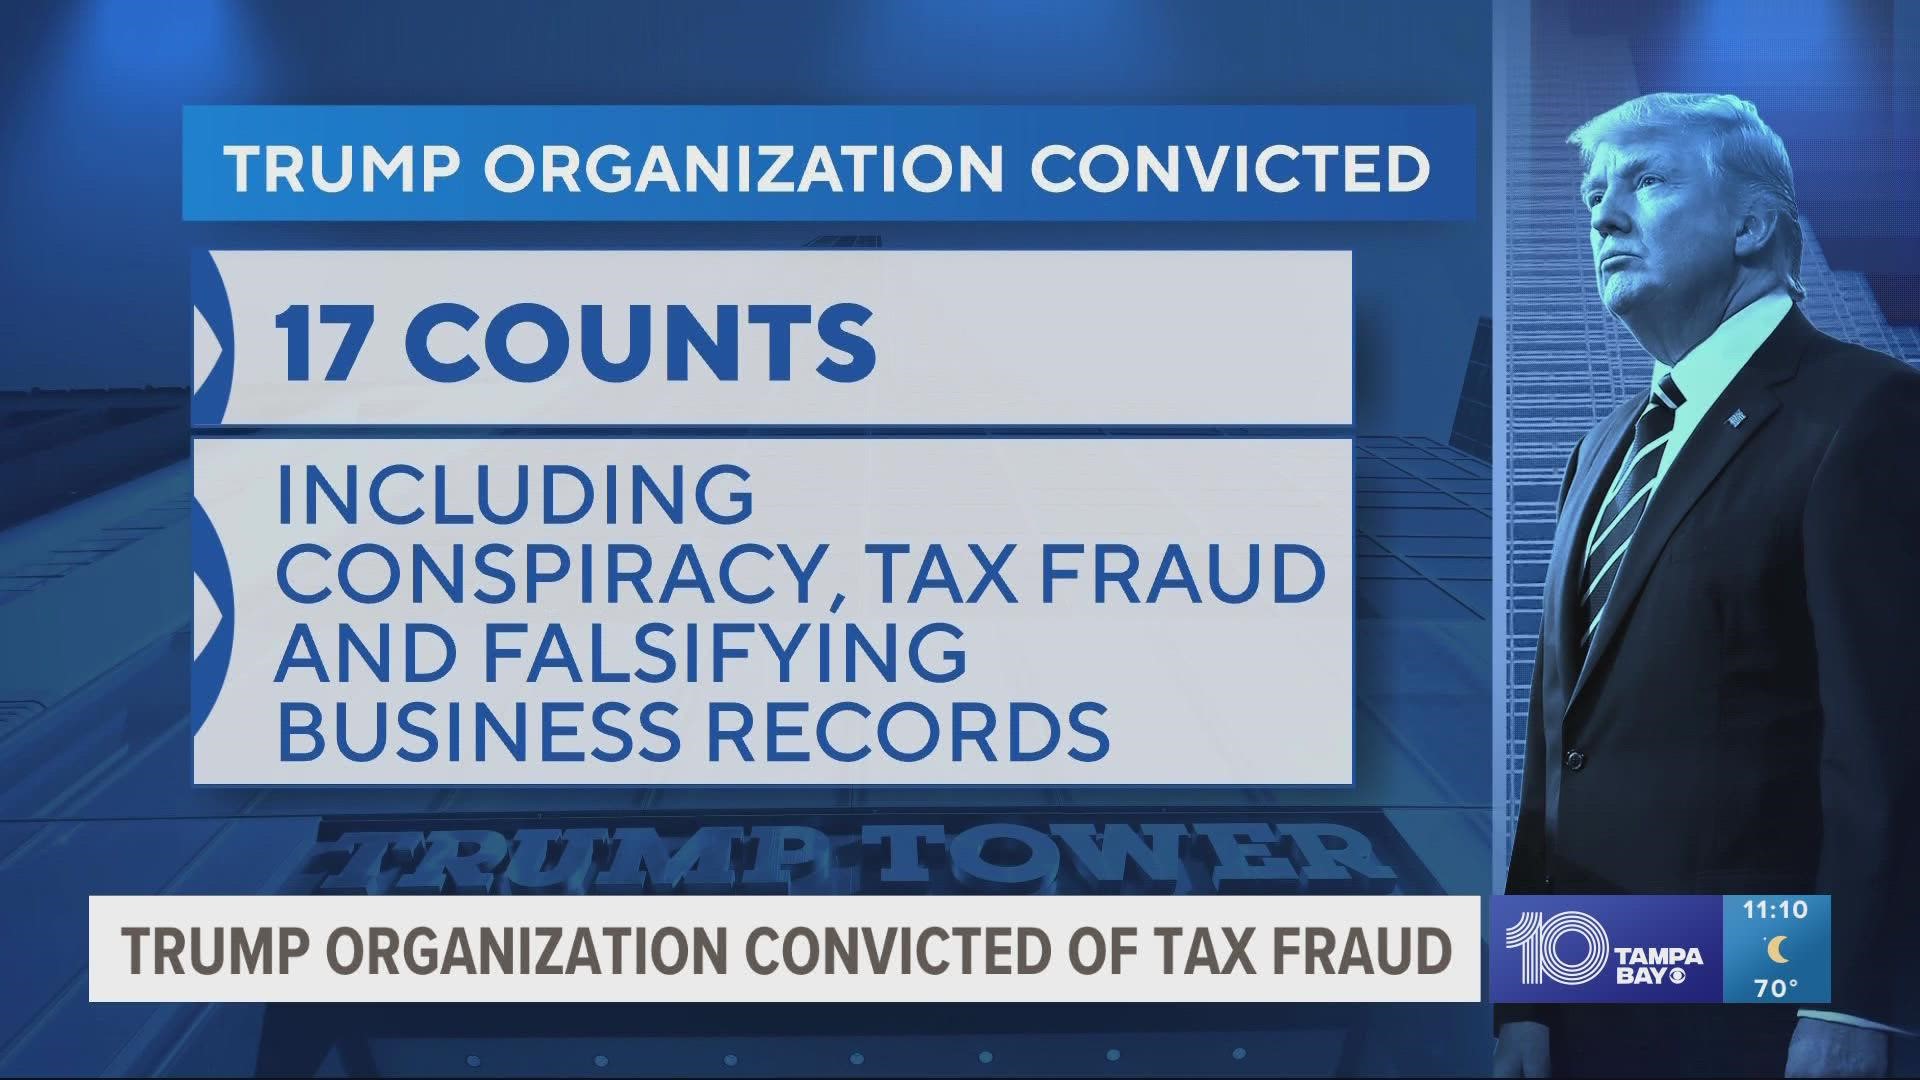 As punishment, the Trump Organization could be fined up to $1.6 million, a relatively small amount for a company of its size.